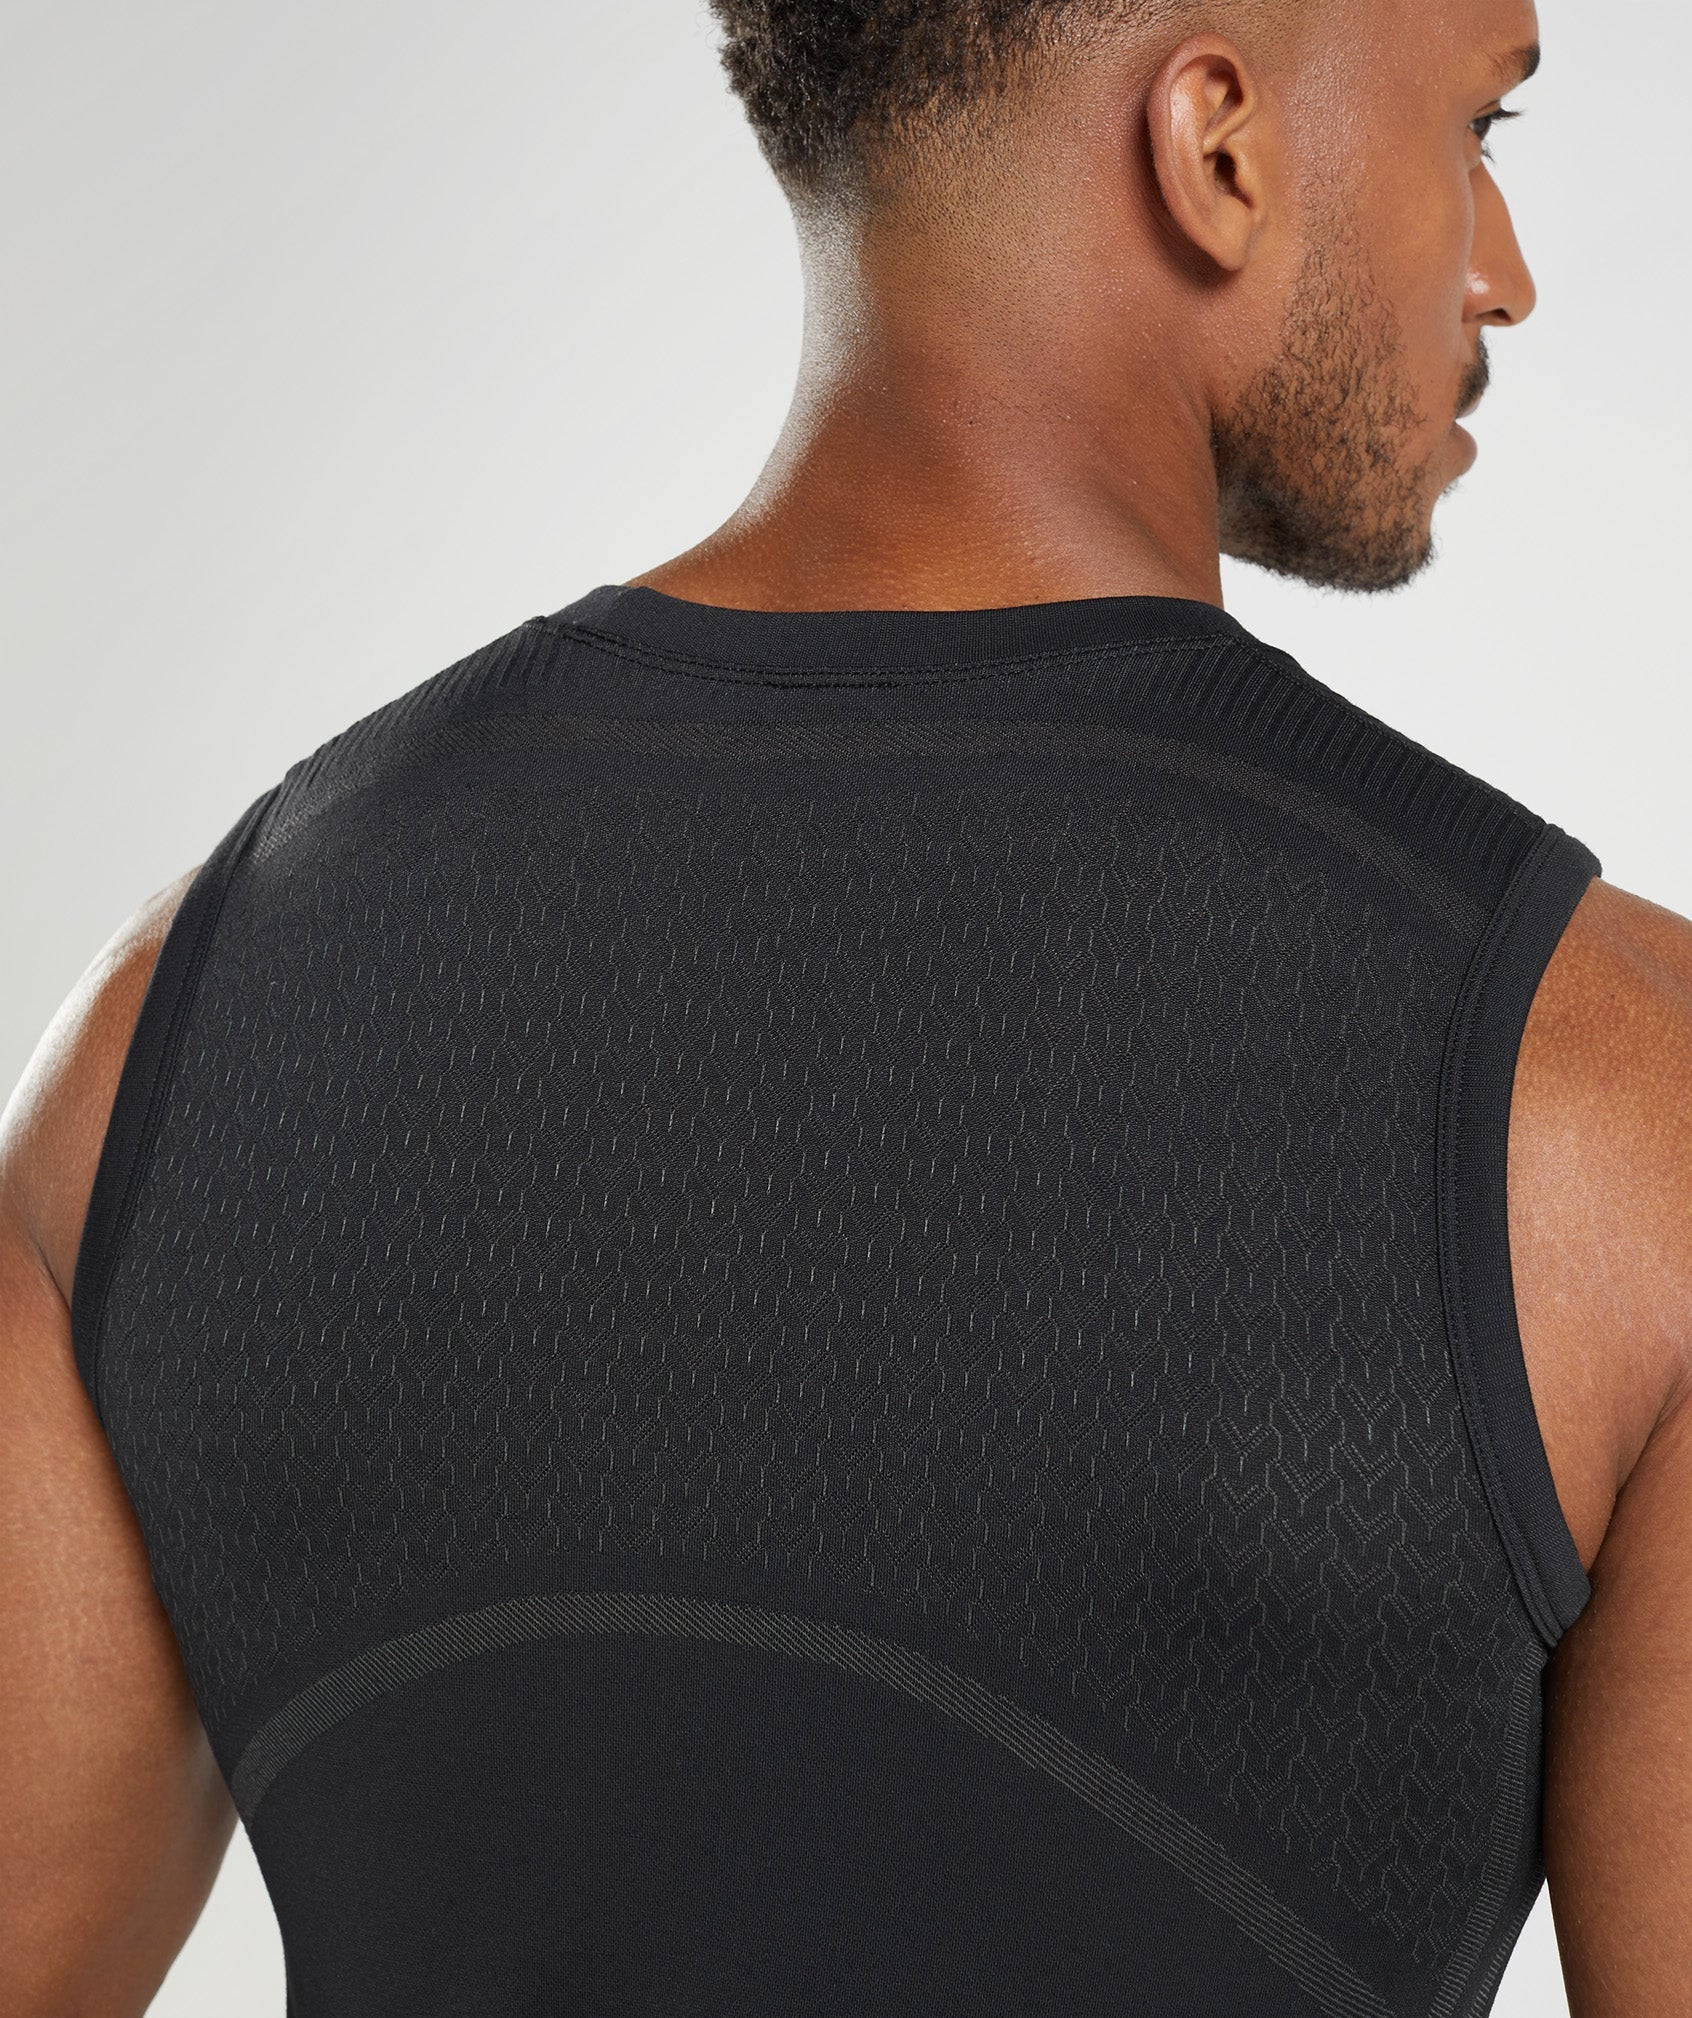 315 Seamless Tank in Black/Charcoal Grey - view 5